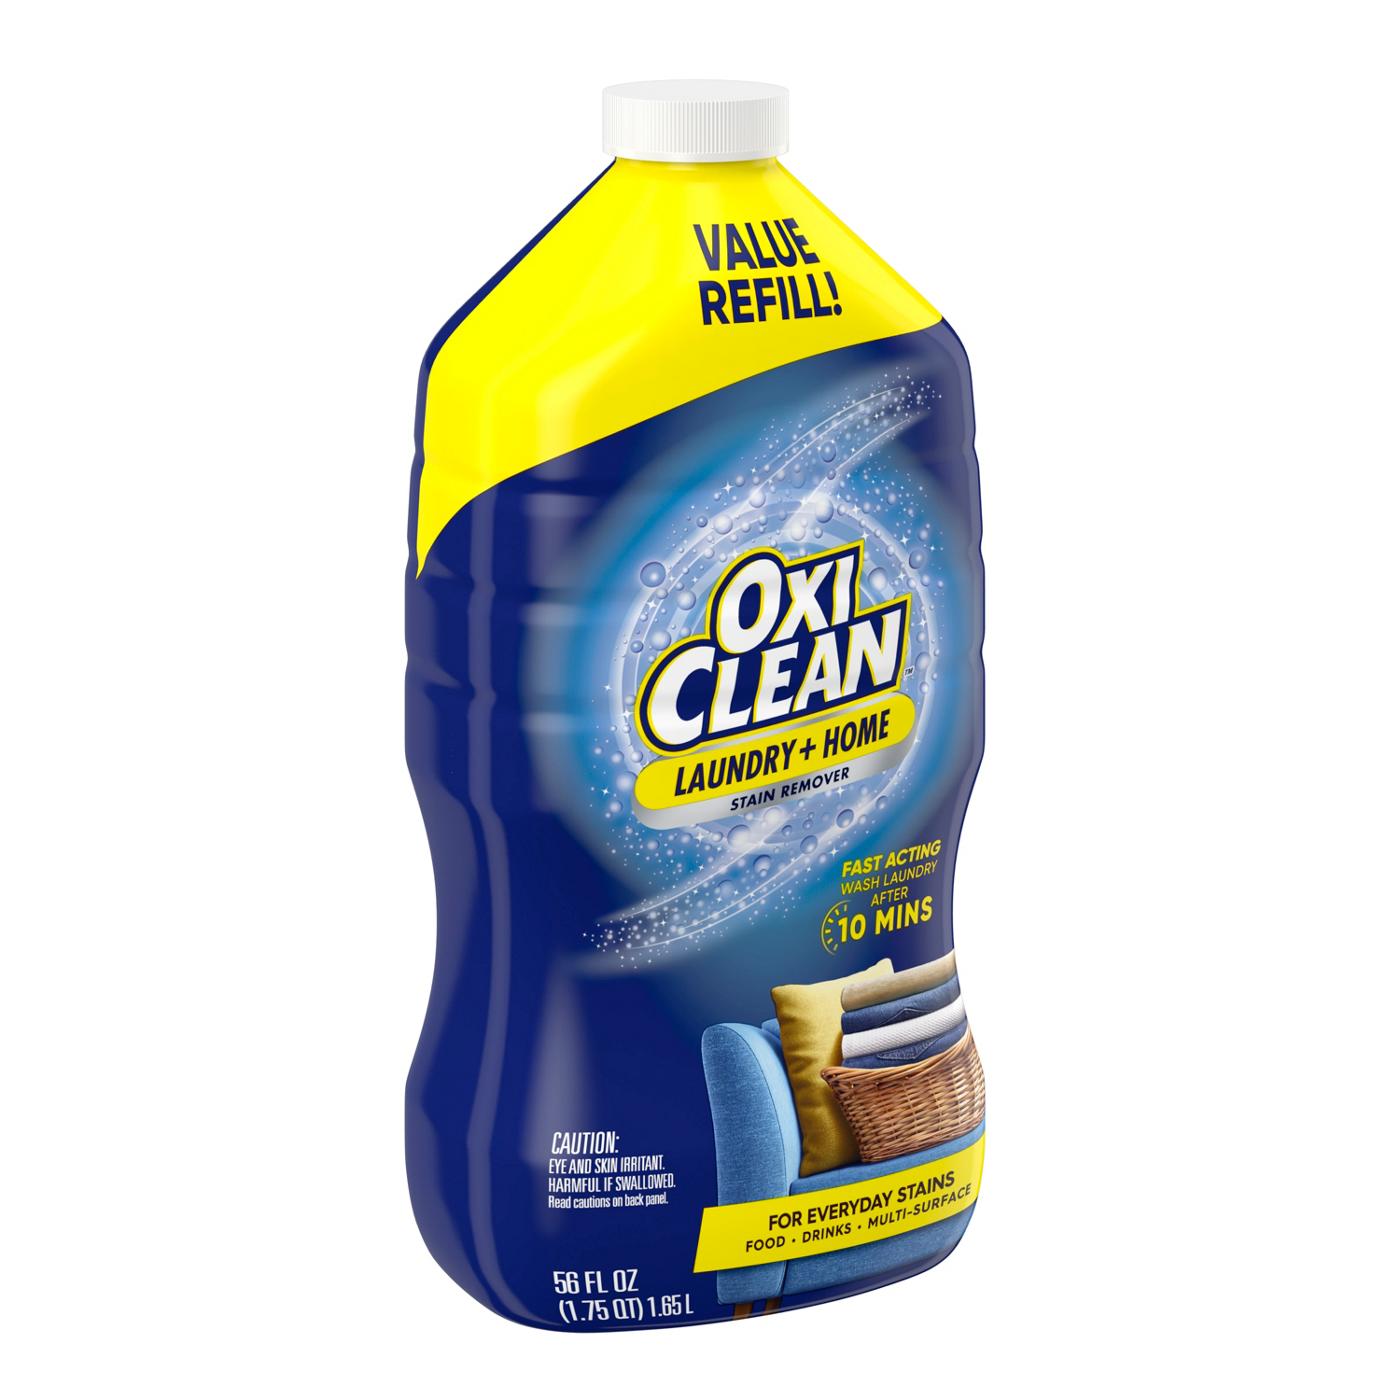 OxiClean Laundry & Home Stain Remover Refill; image 3 of 4